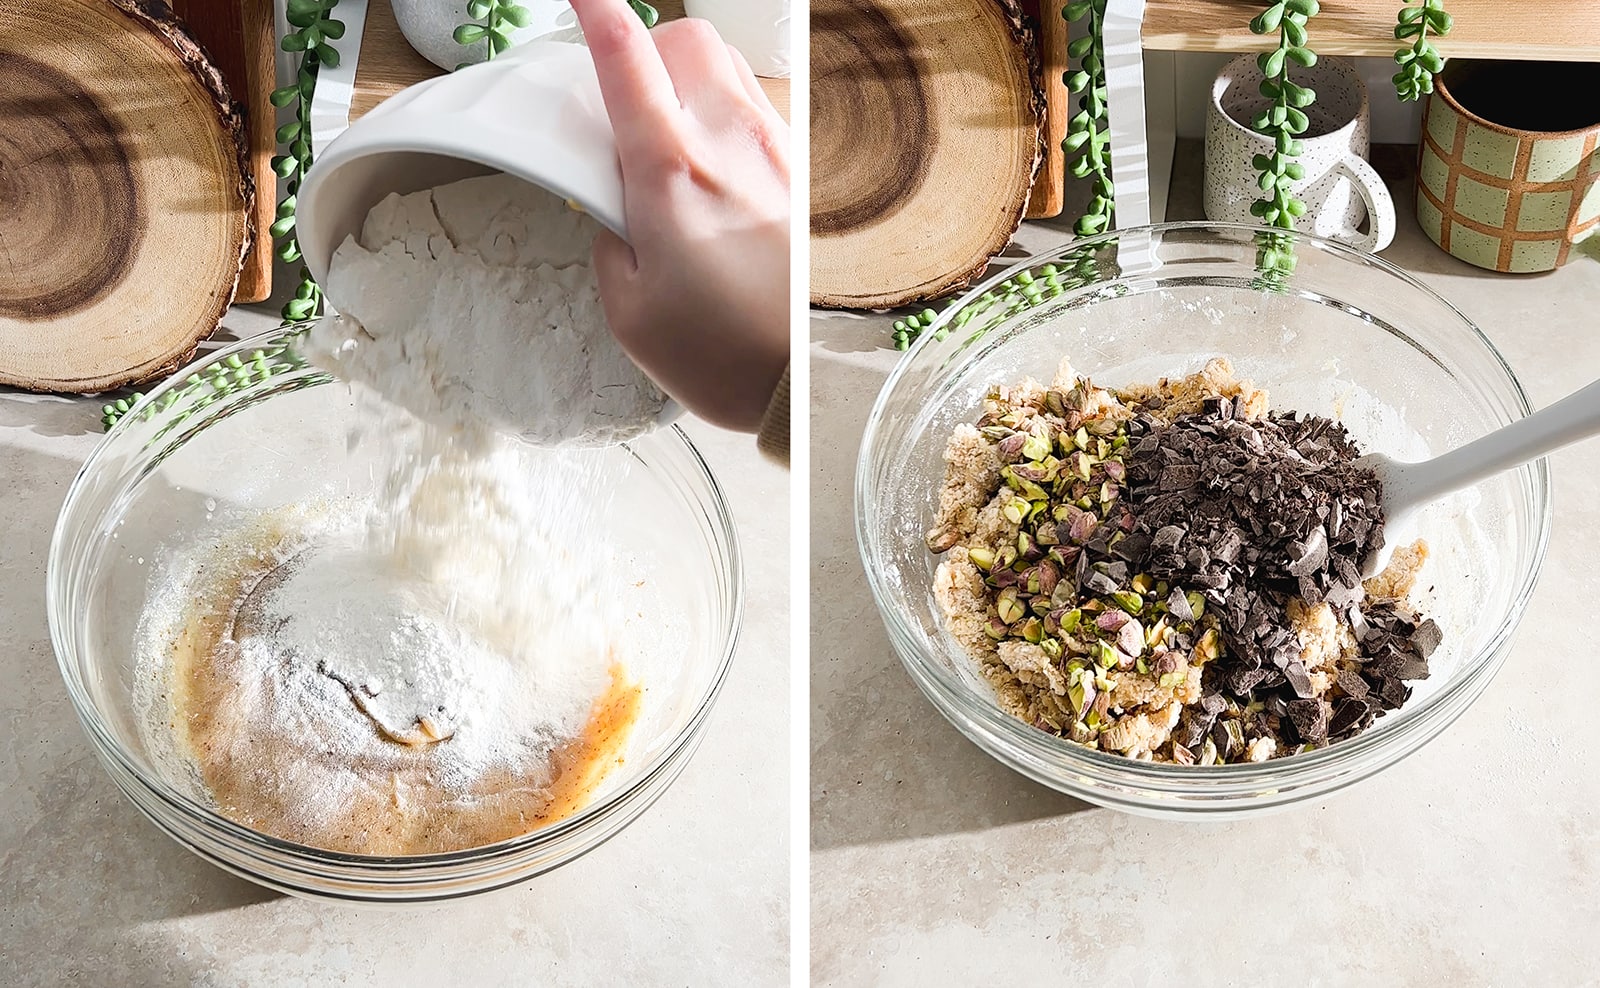 Left to right: hand pouring flour into mixing bowl, chopped chocolate and pistachios on top of cookie dough.